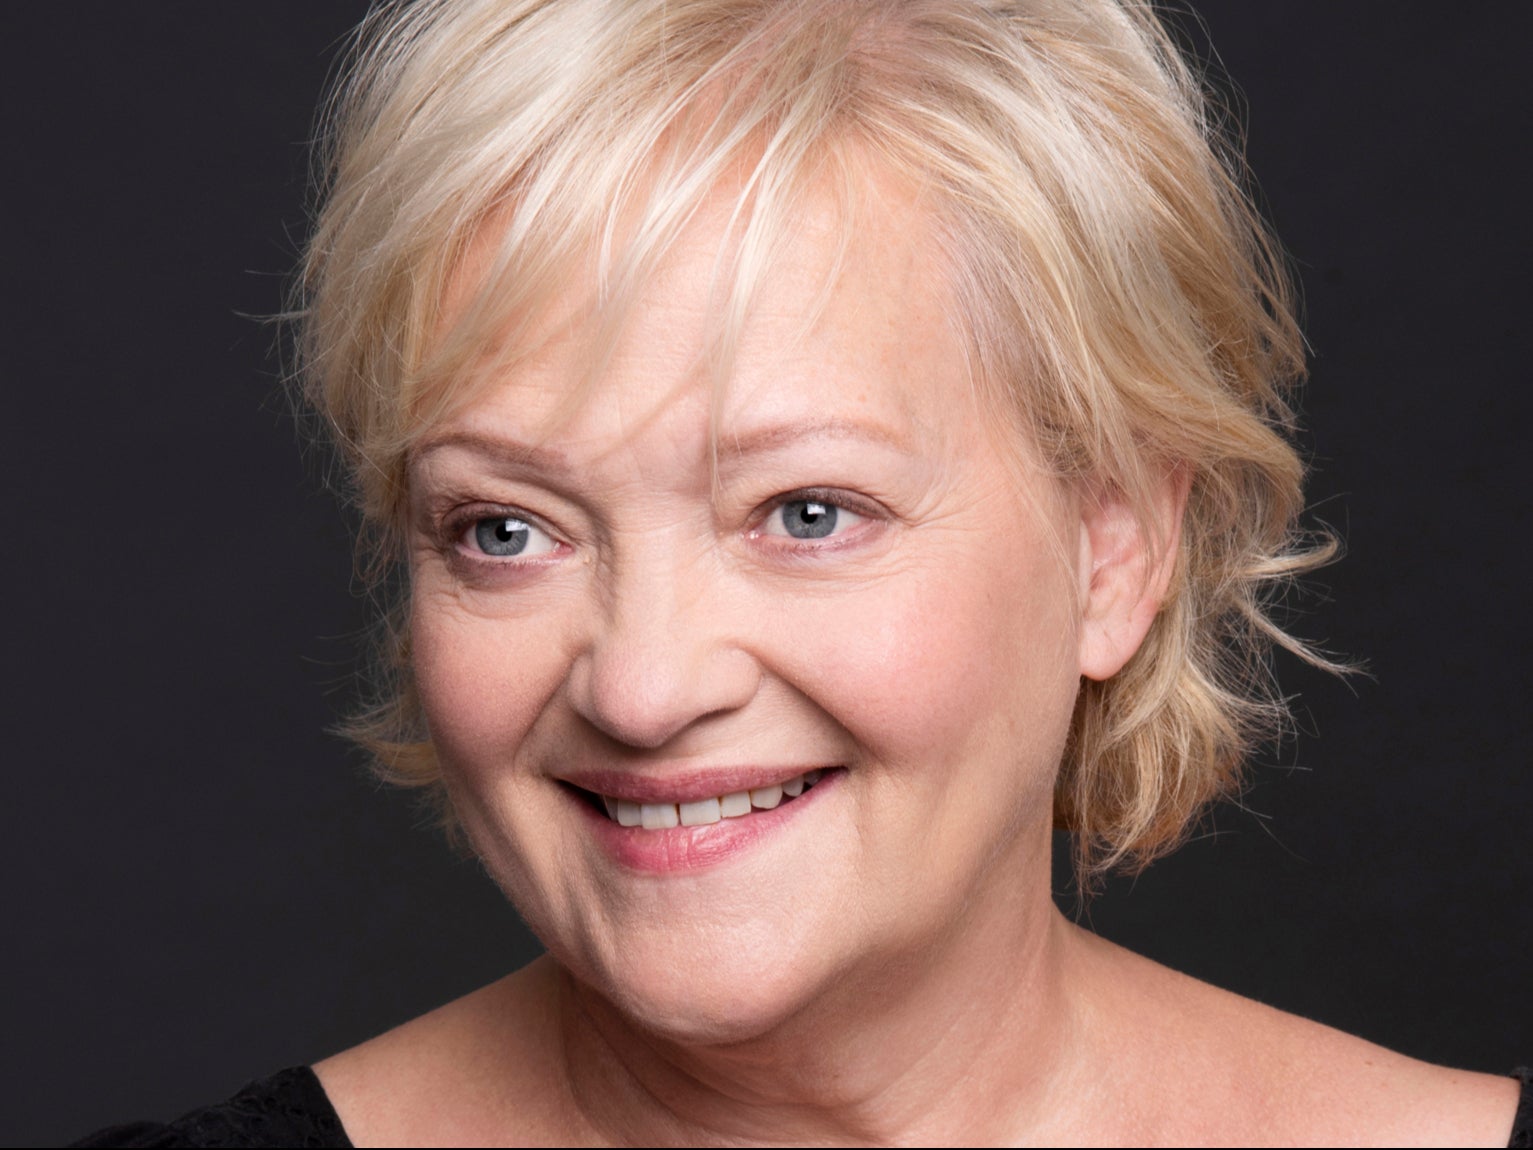 ‘Stephen Sondheim would cry when he talked about teaching,’ says Maria Friedman